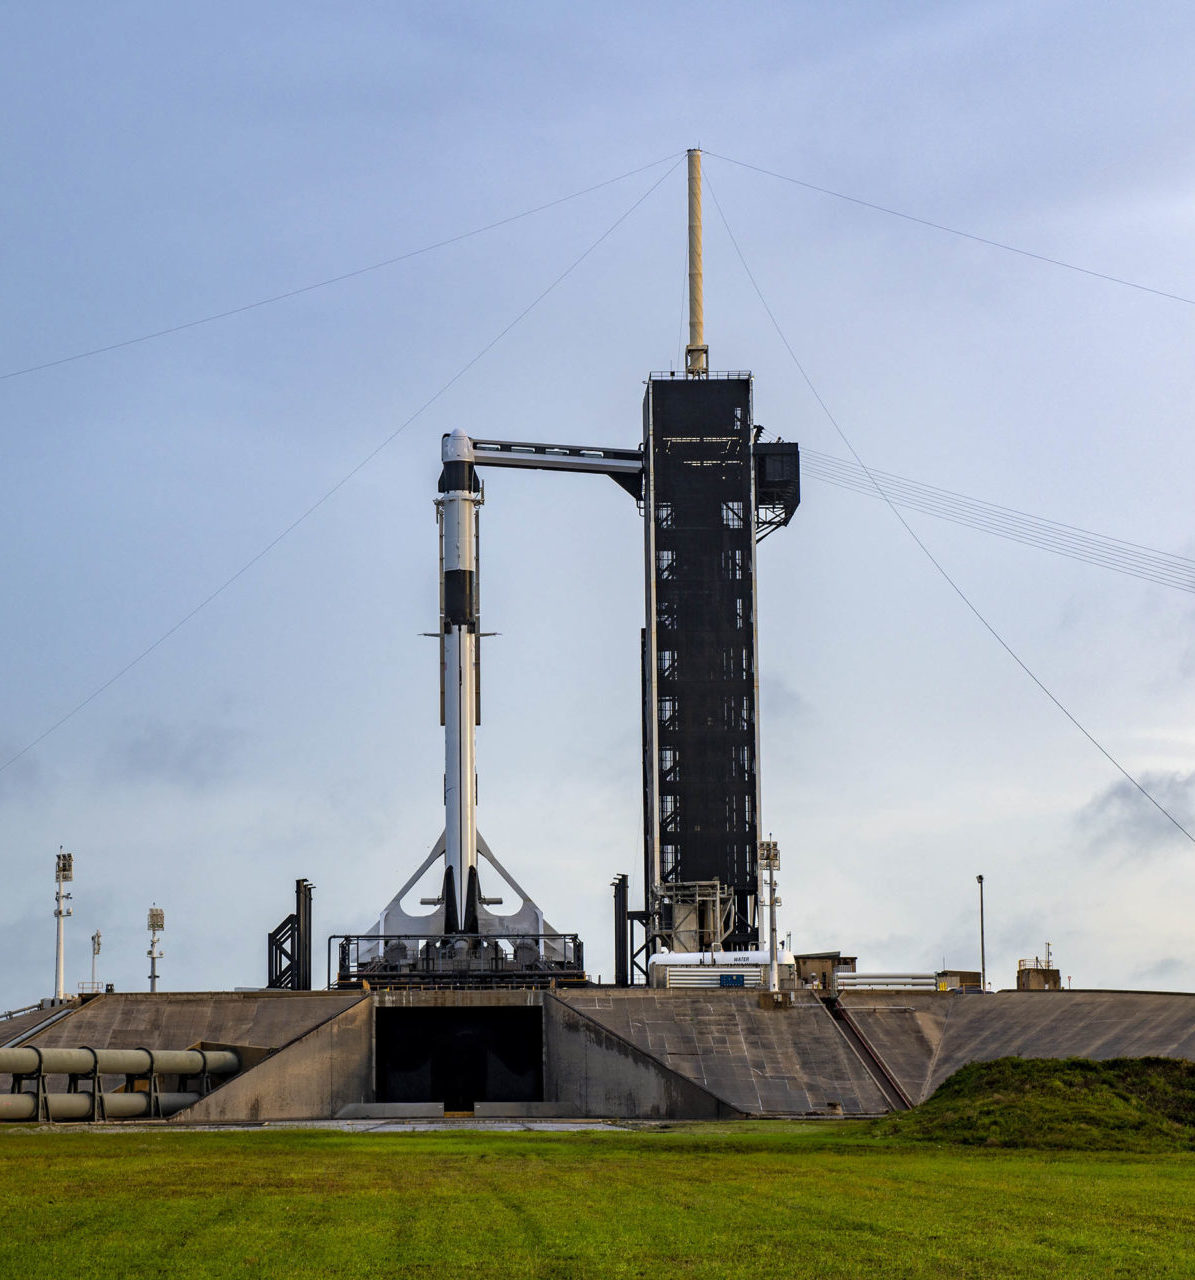 SpaceX-22 Falcon 9 with Dragon Capsule